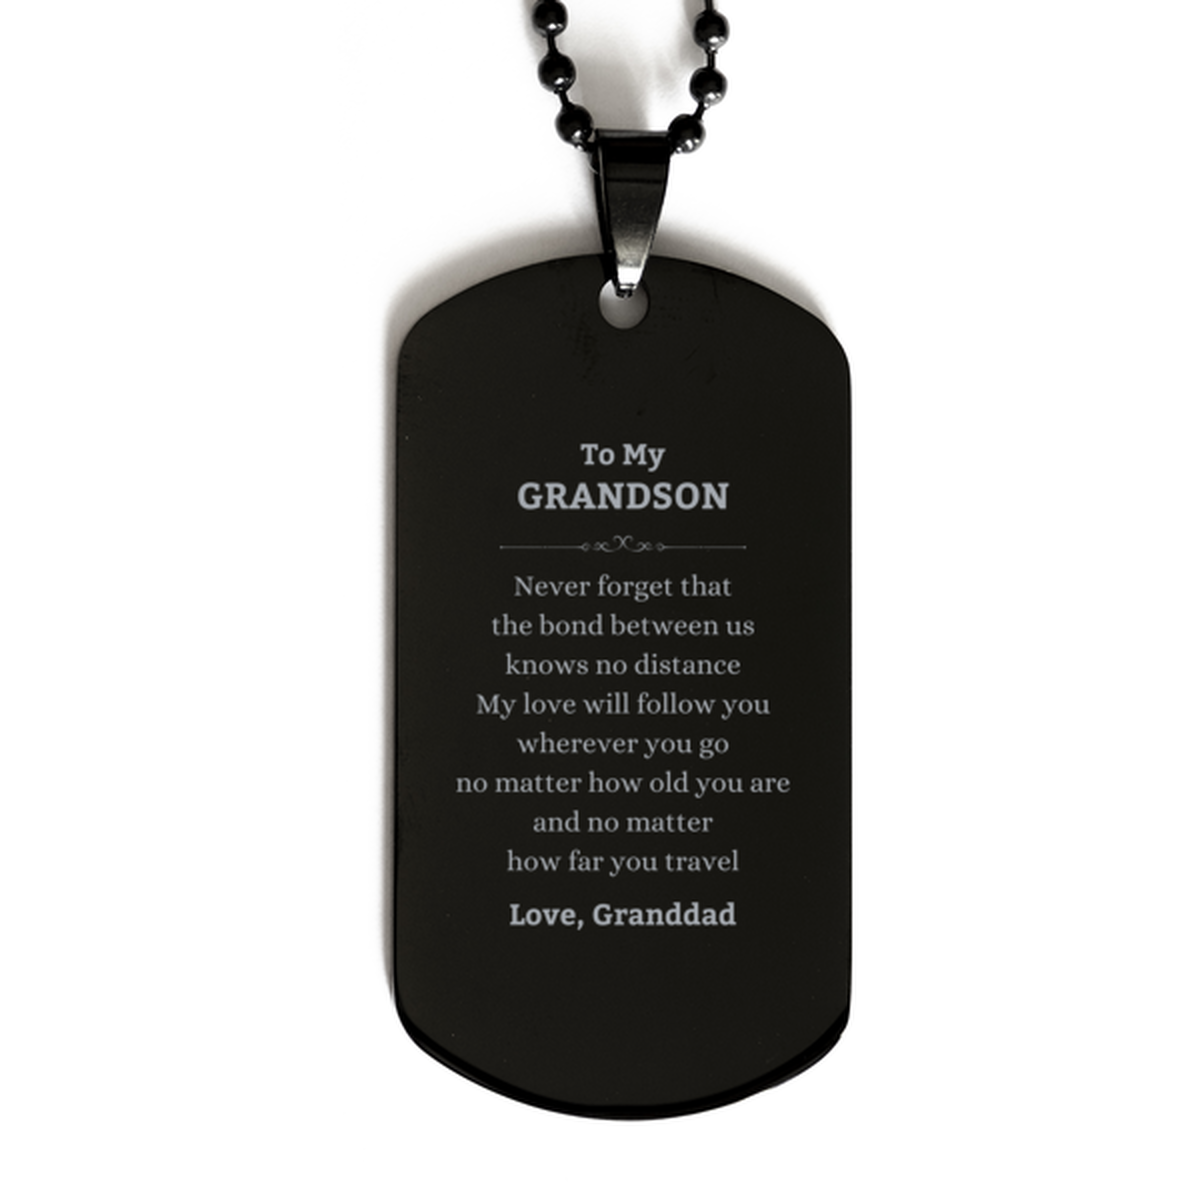 Grandson Birthday Gifts from Granddad, Adjustable Black Dog Tag for Grandson Christmas Graduation Unique Gifts Grandson Never forget that the bond between us knows no distance. Love, Granddad